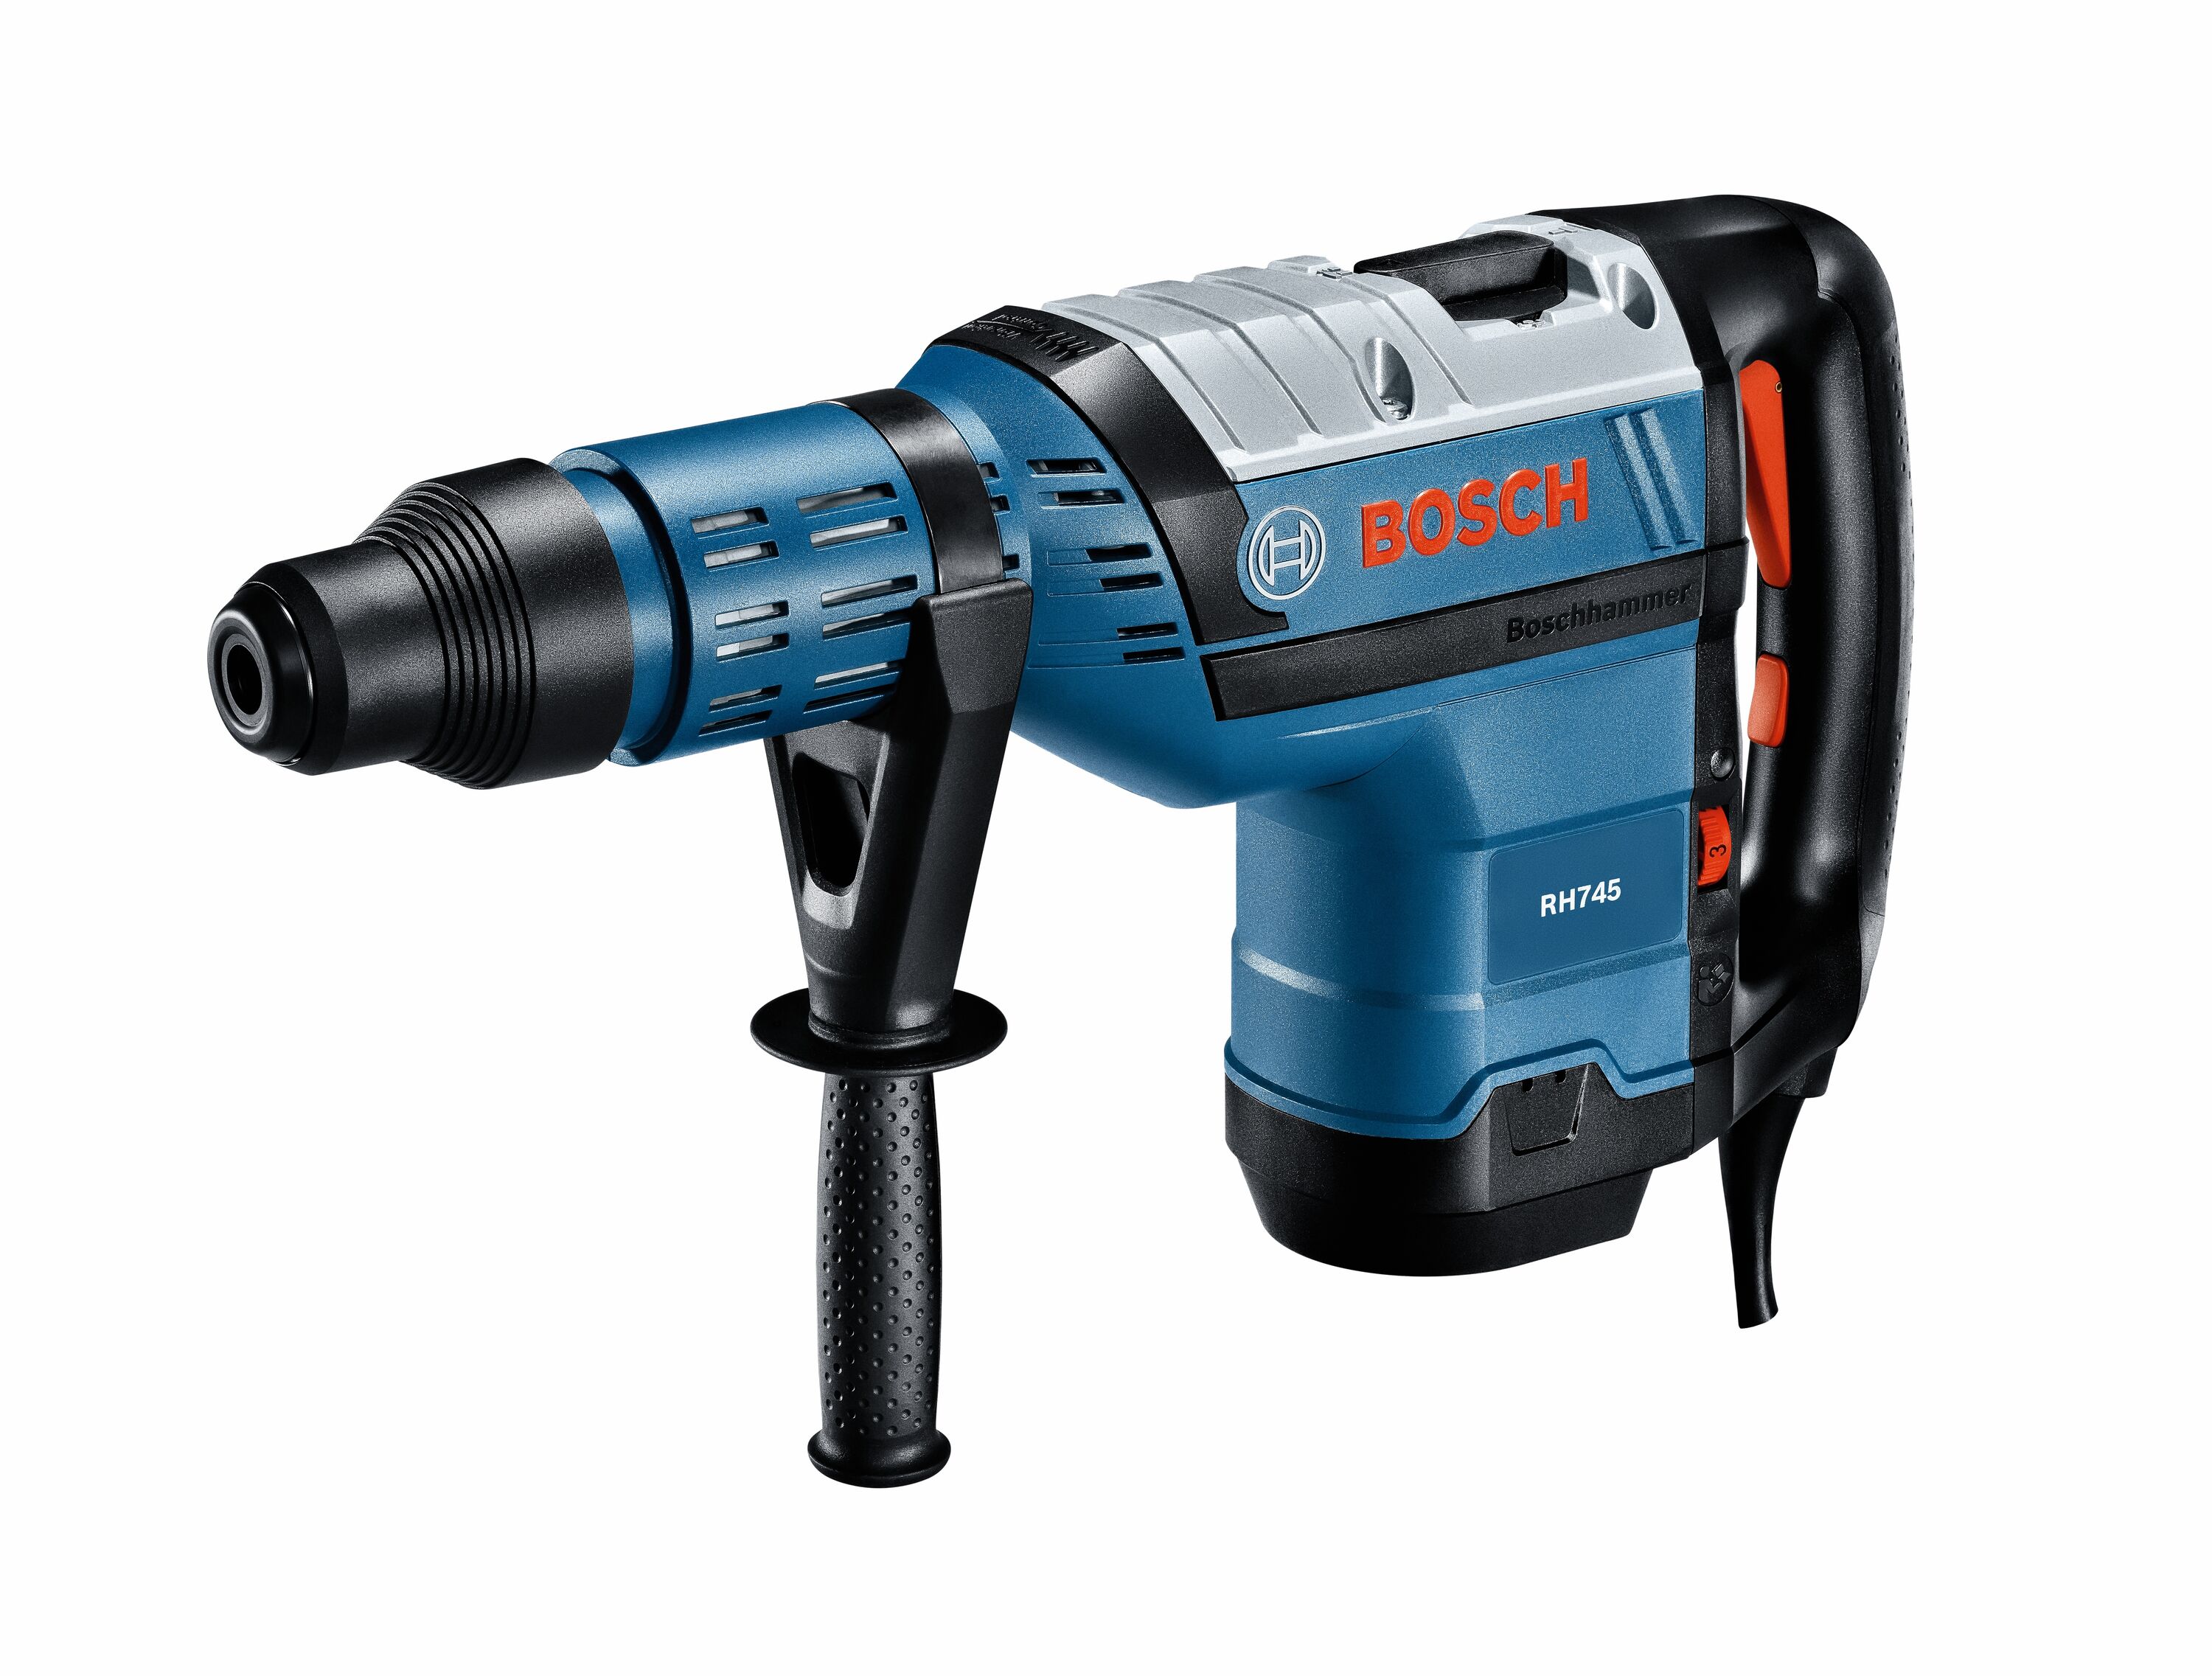 Bosch 8-Amp Sds-plus Variable Speed Corded Rotary Hammer Drill in